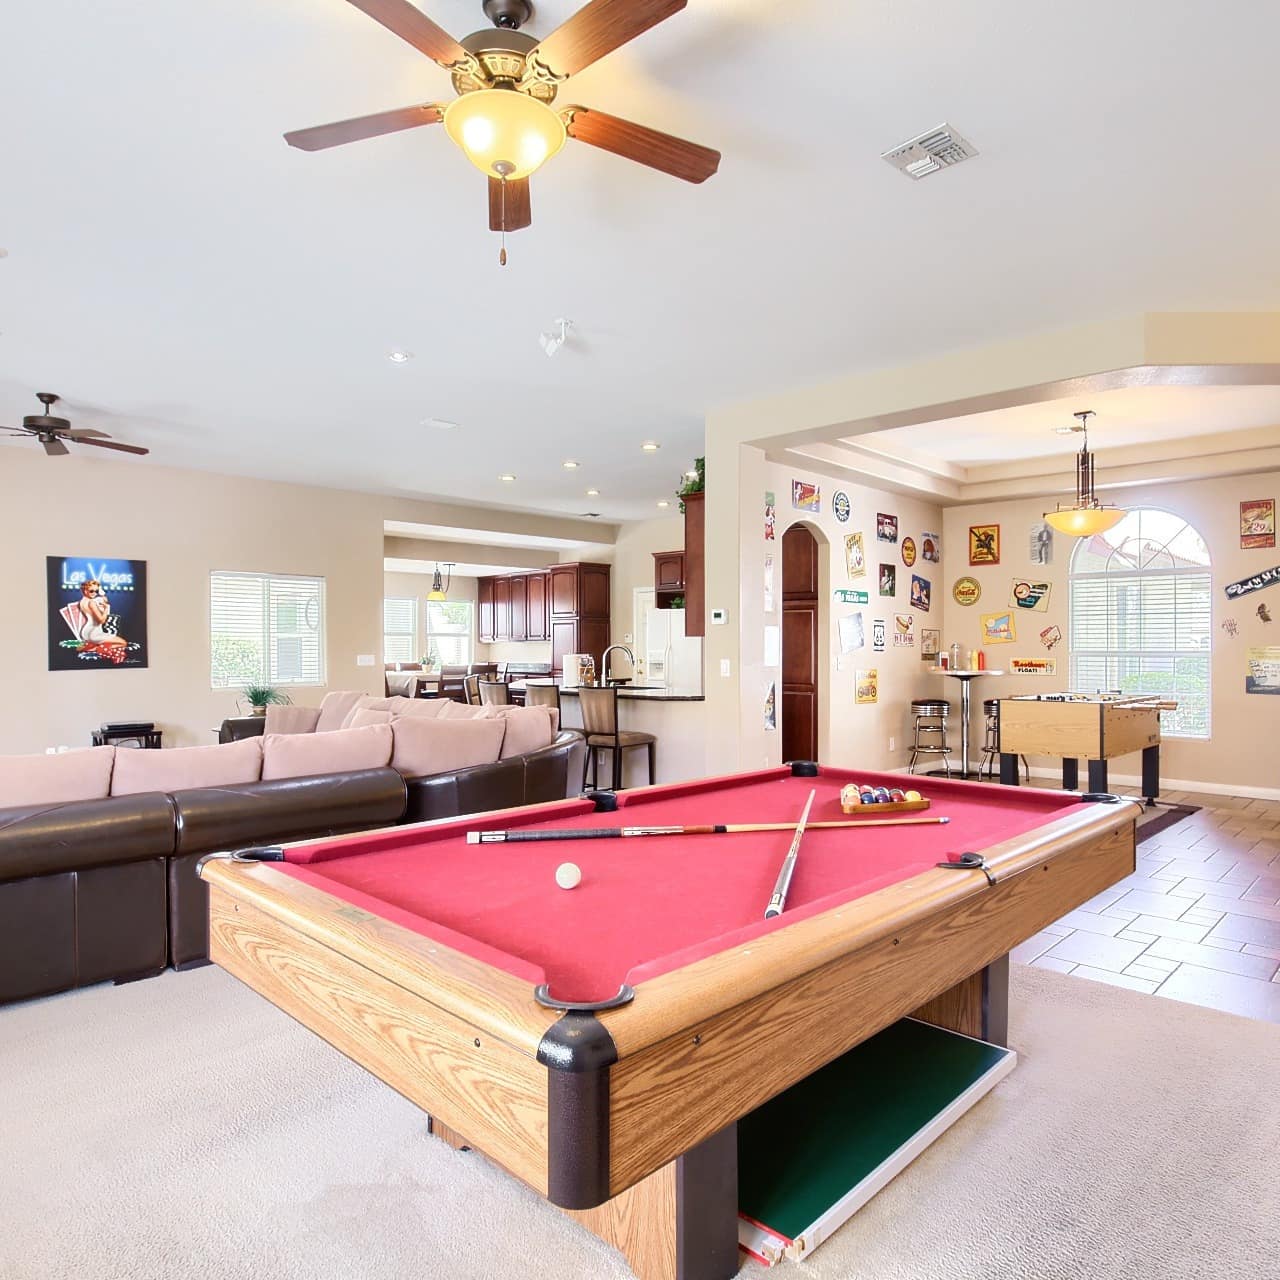 Game room of luxurious Las Vegas home with pool table, foosball, leather sectional and flat-screen TV